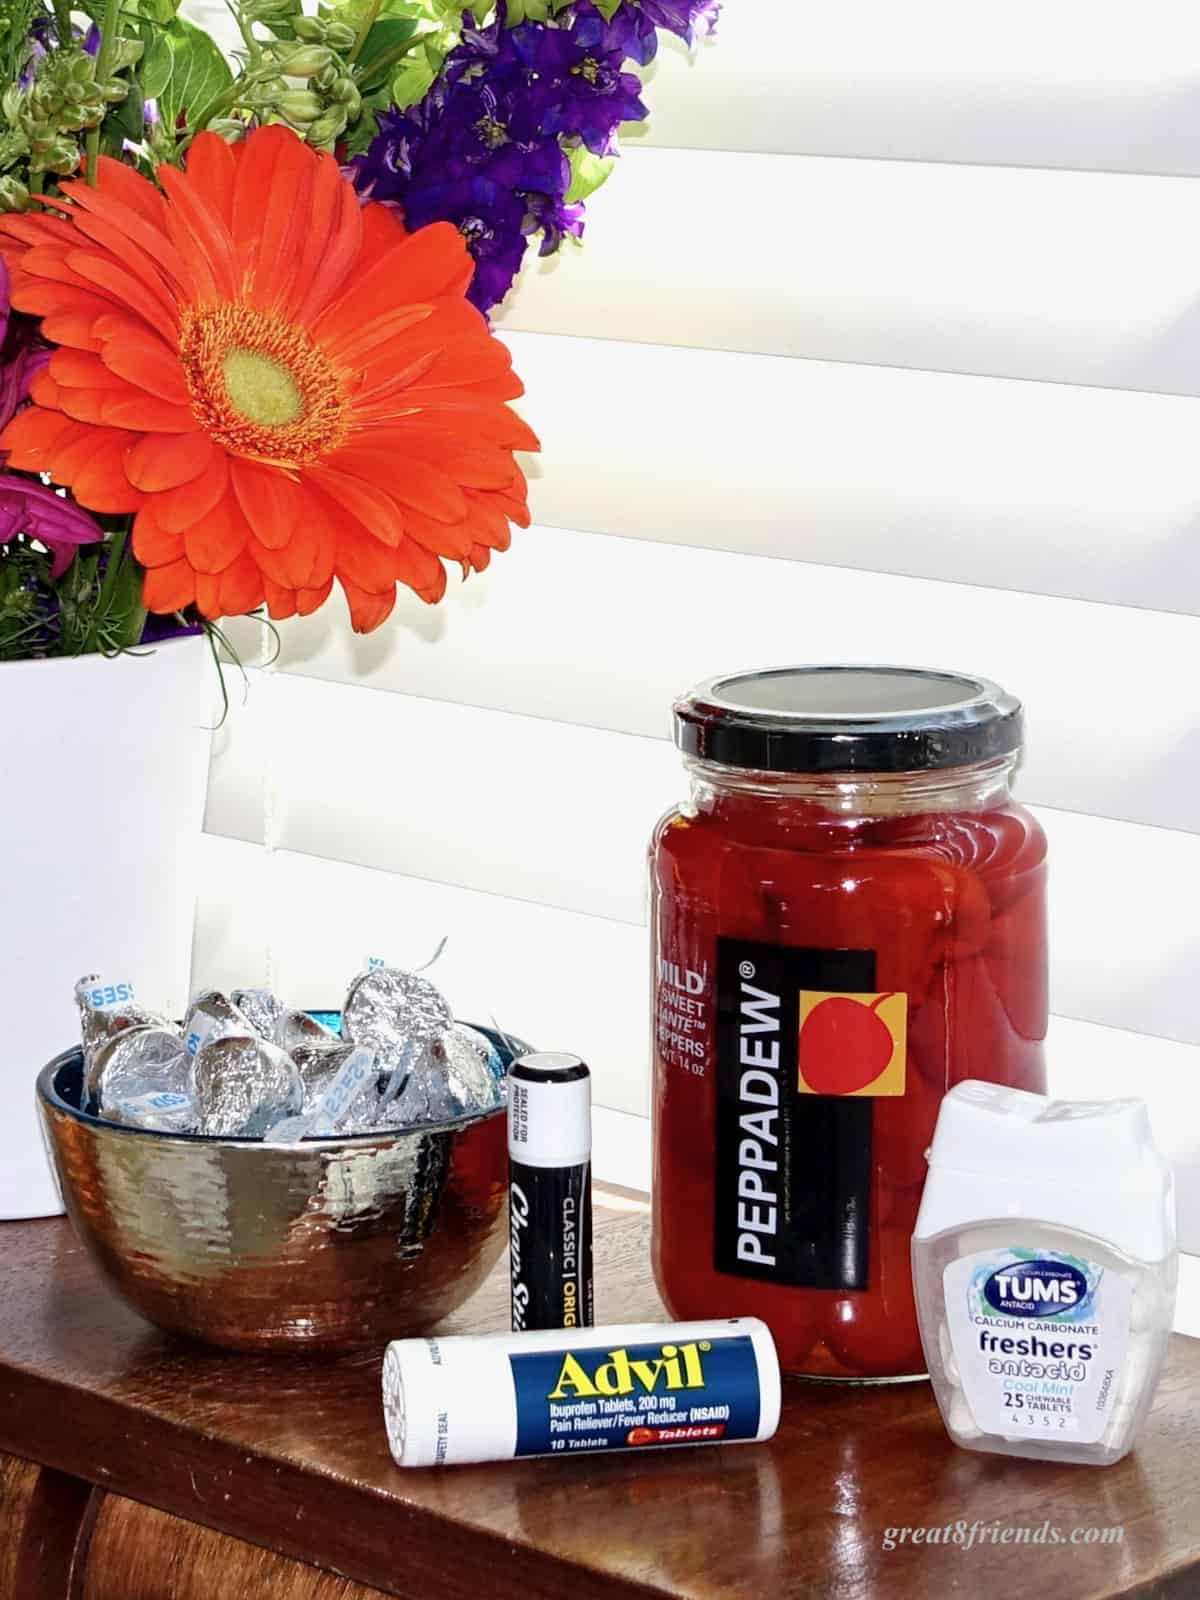 Some fresh flowers, a bowl of Hershey's kisses, Advil, ChapStick, Tums, and a jar of Peppadews.